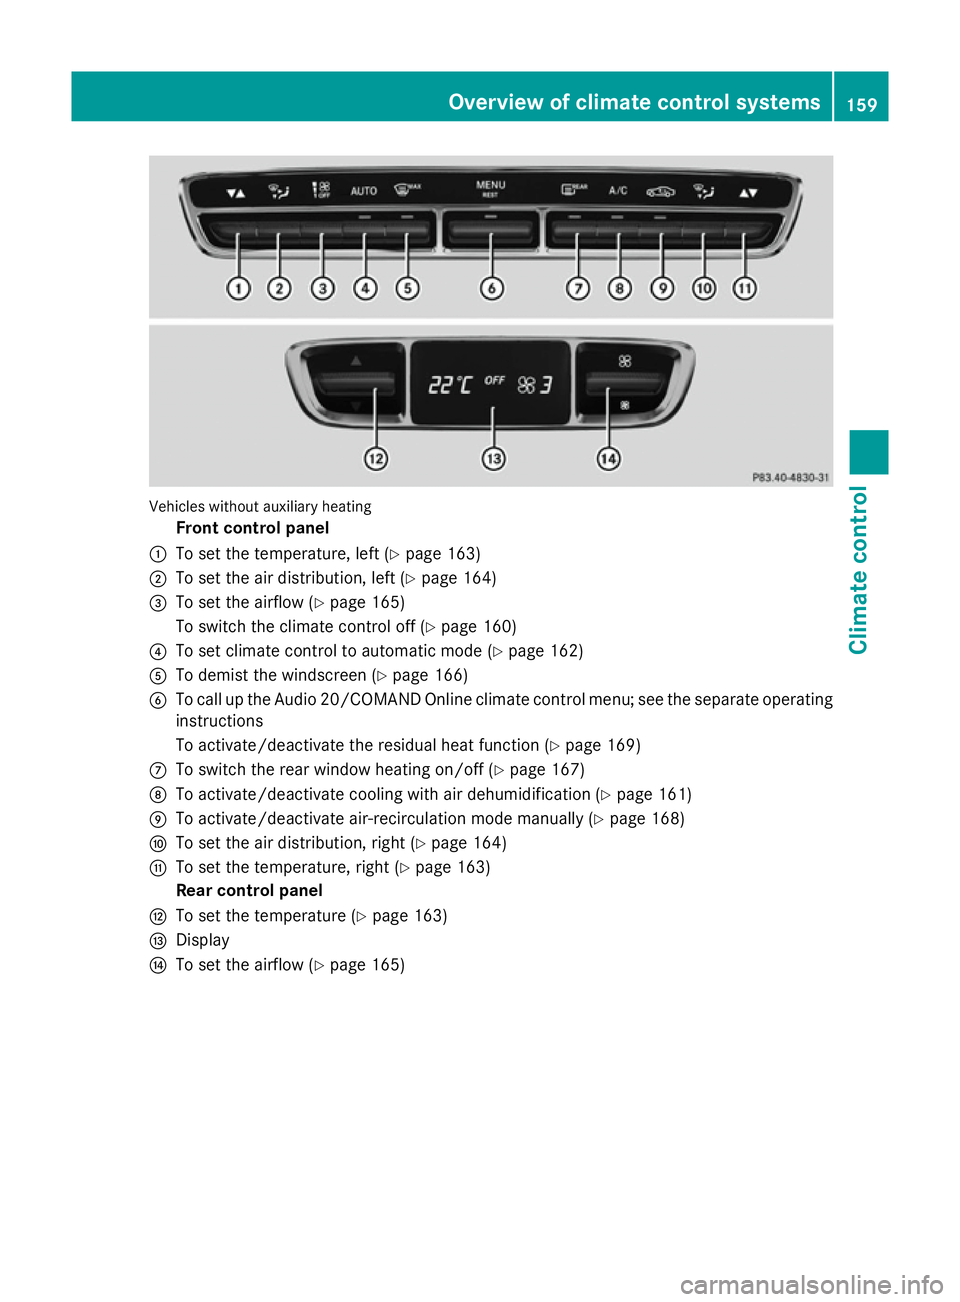 MERCEDES-BENZ C-CLASS ESTATE 2014  Owners Manual Vehicles without auxiliary heating
Front control panel
: To set the temperature, left (Y page 163)
; To set the air distribution, left (Y page 164)
= To set the airflow (Y page 165)
To switch the clim